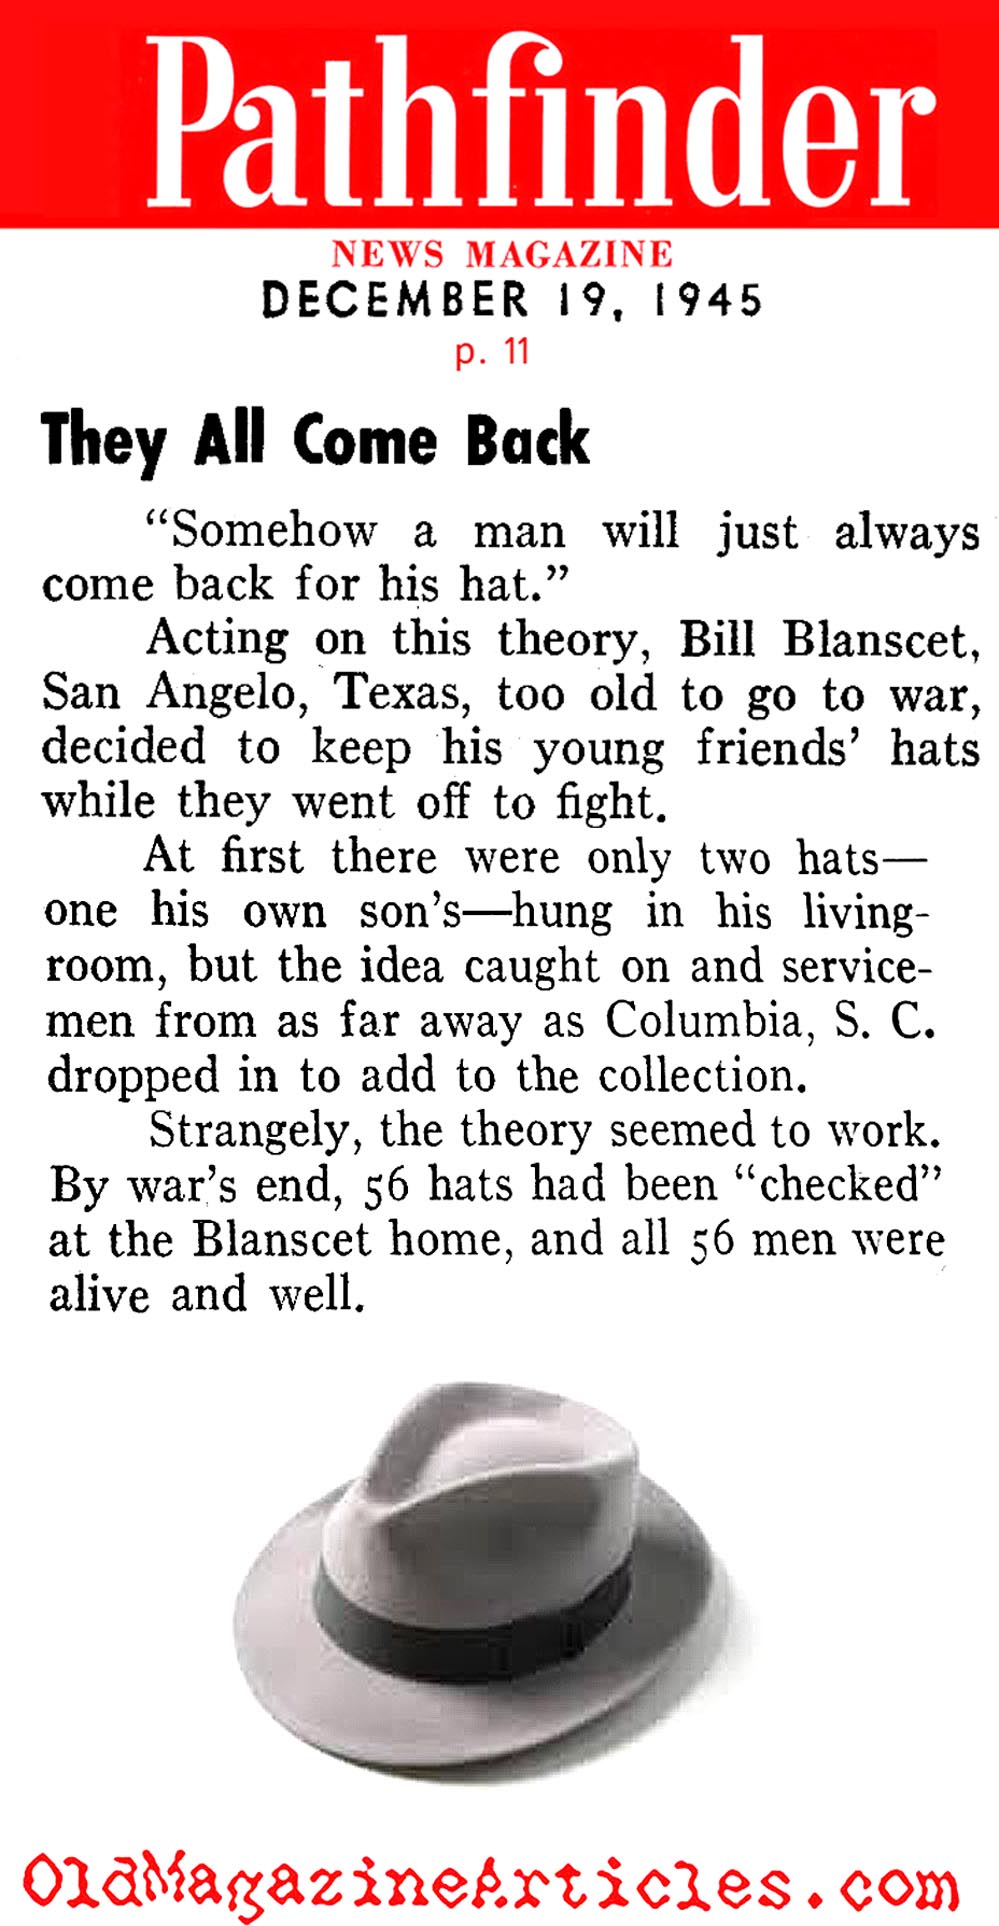 The Hat Superstition that was Reliable... (Pathfinder Magazine, 1945)